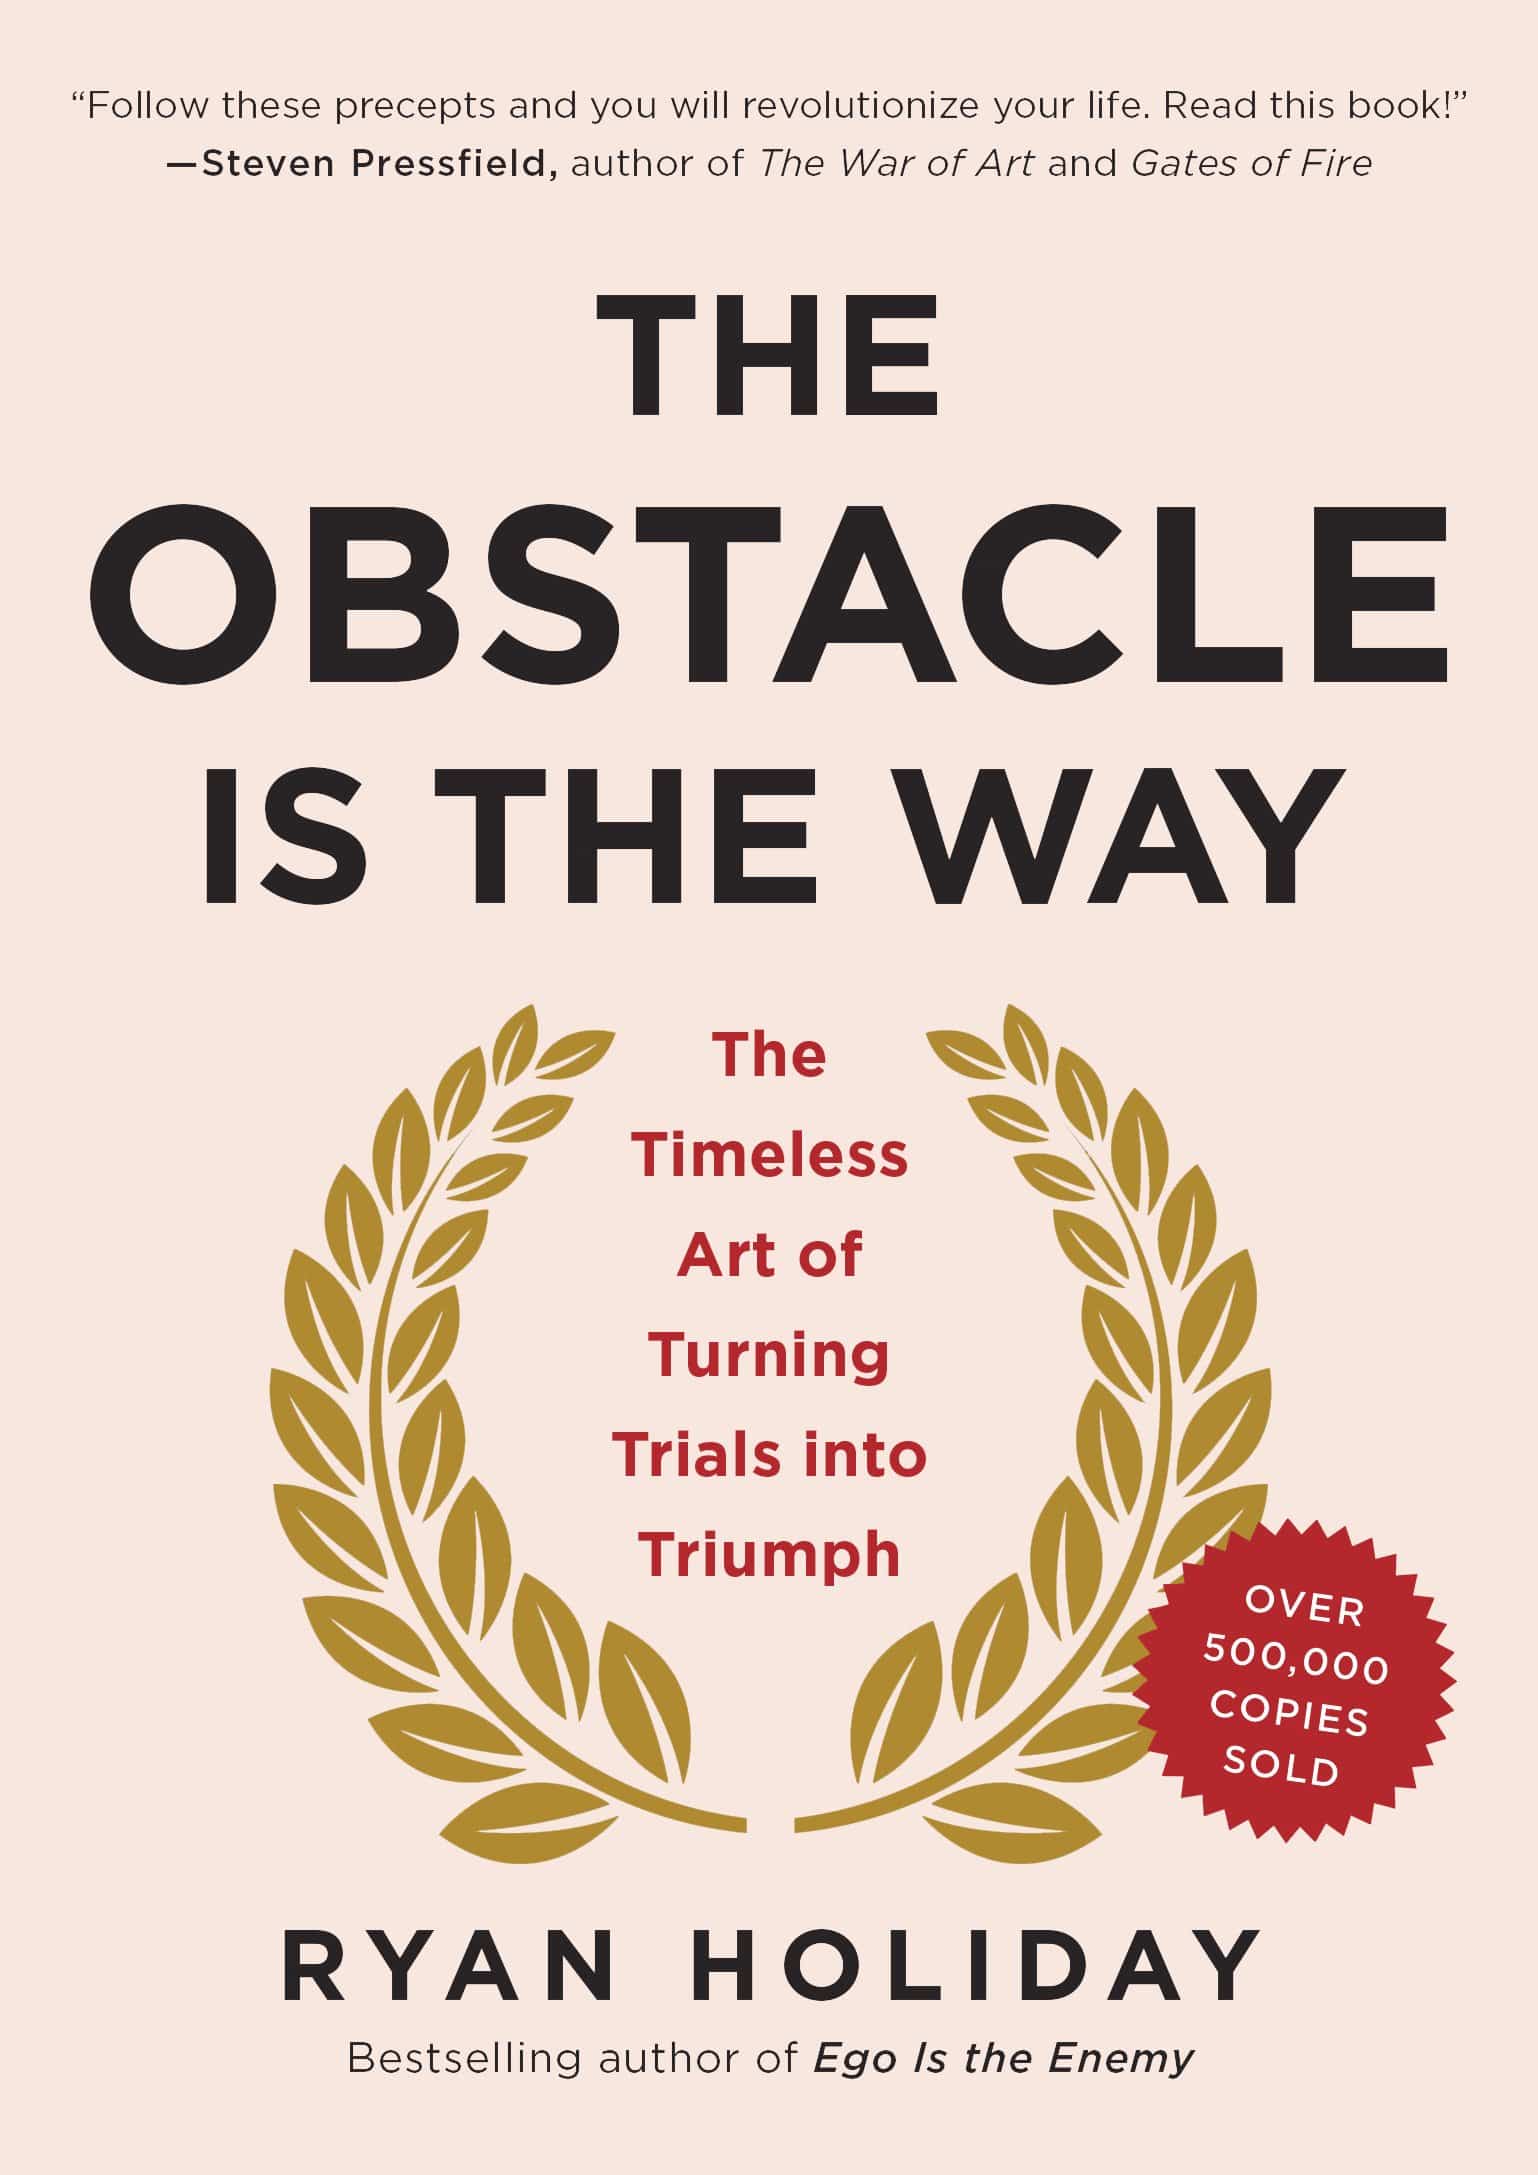 The cover of The Obstacle is the Way